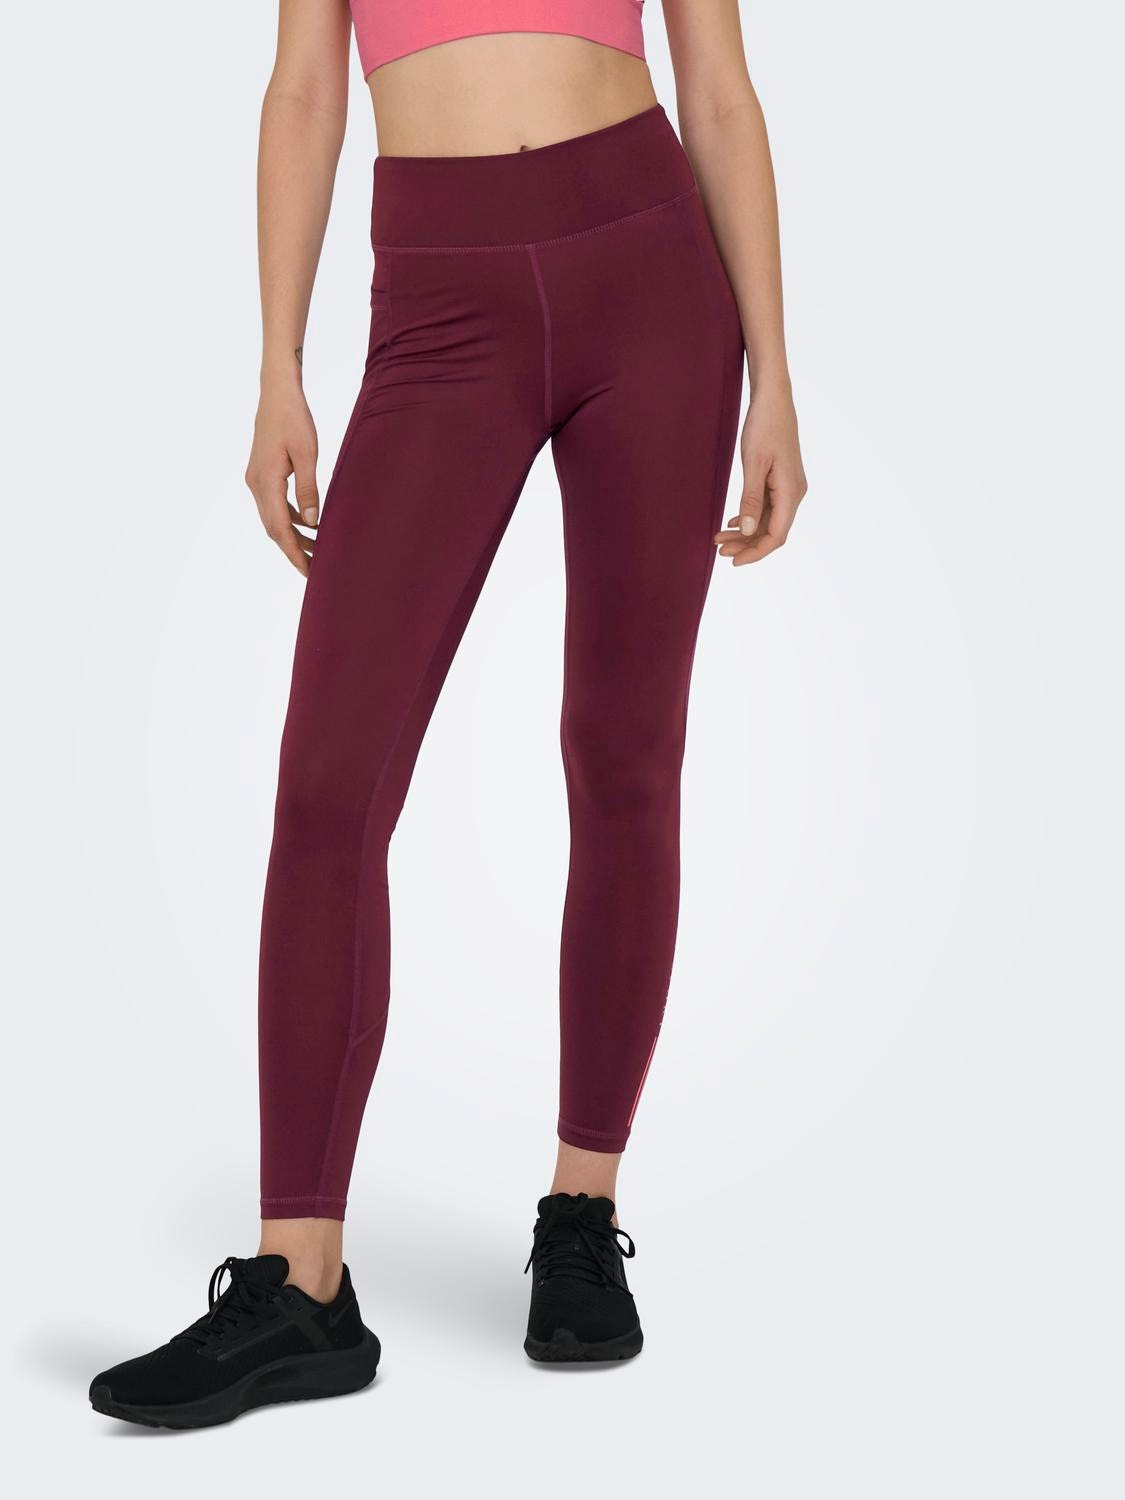 https://images.only.com/15295214/4235780/003/only-tightfithighwaistleggings-purple.jpg?v=a506c8c2543a01888df03bfd0ad346d9&format=webp&width=1280&quality=90&key=25-0-3